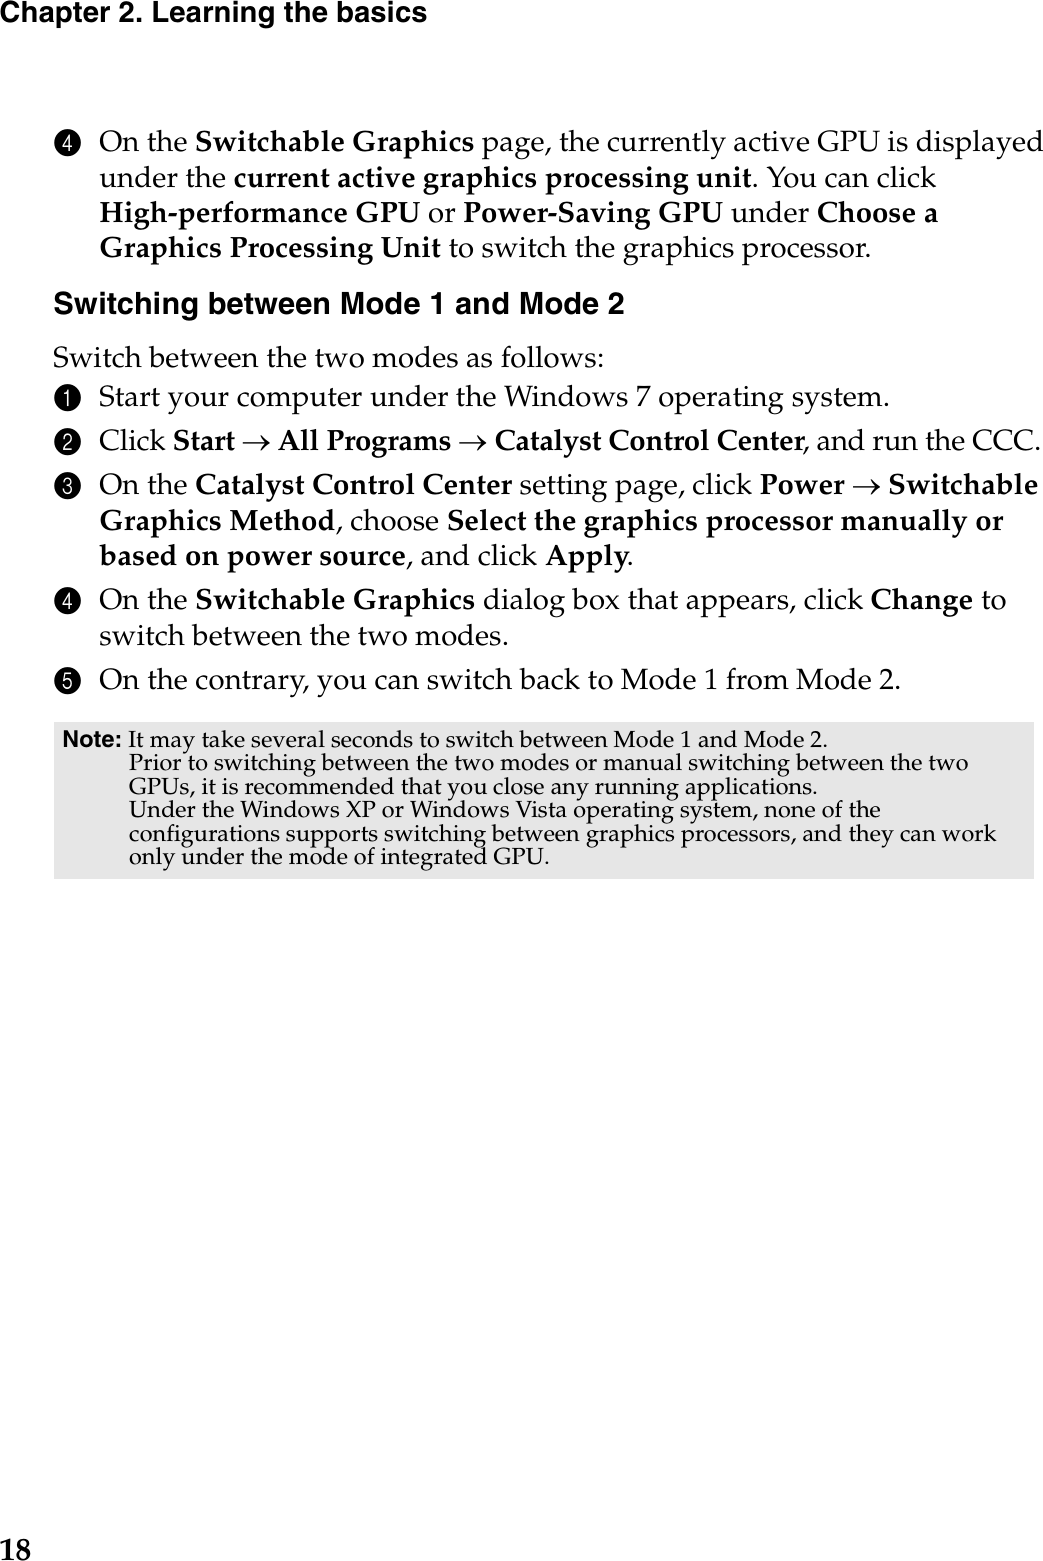 18Chapter 2. Learning the basics4On the Switchable Graphics page, the currently active GPU is displayed under the current active graphics processing unit. You can click High-performance GPU or Power-Saving GPU under Choose a Graphics Processing Unit to switch the graphics processor.Switching between Mode 1 and Mode 2Switch between the two modes as follows:1Start your computer under the Windows 7 operating system.2Click Start oAll Programs oCatalyst Control Center, and run the CCC.3On the Catalyst Control Center setting page, click Power oSwitchable Graphics Method, choose Select the graphics processor manually or based on power source, and click Apply.4On the Switchable Graphics dialog box that appears, click Change to switch between the two modes.5On the contrary, you can switch back to Mode 1 from Mode 2.Note: It may take several seconds to switch between Mode 1 and Mode 2.Prior to switching between the two modes or manual switching between the two GPUs, it is recommended that you close any running applications.Under the Windows XP or Windows Vista operating system, none of the configurations supports switching between graphics processors, and they can work only under the mode of integrated GPU.